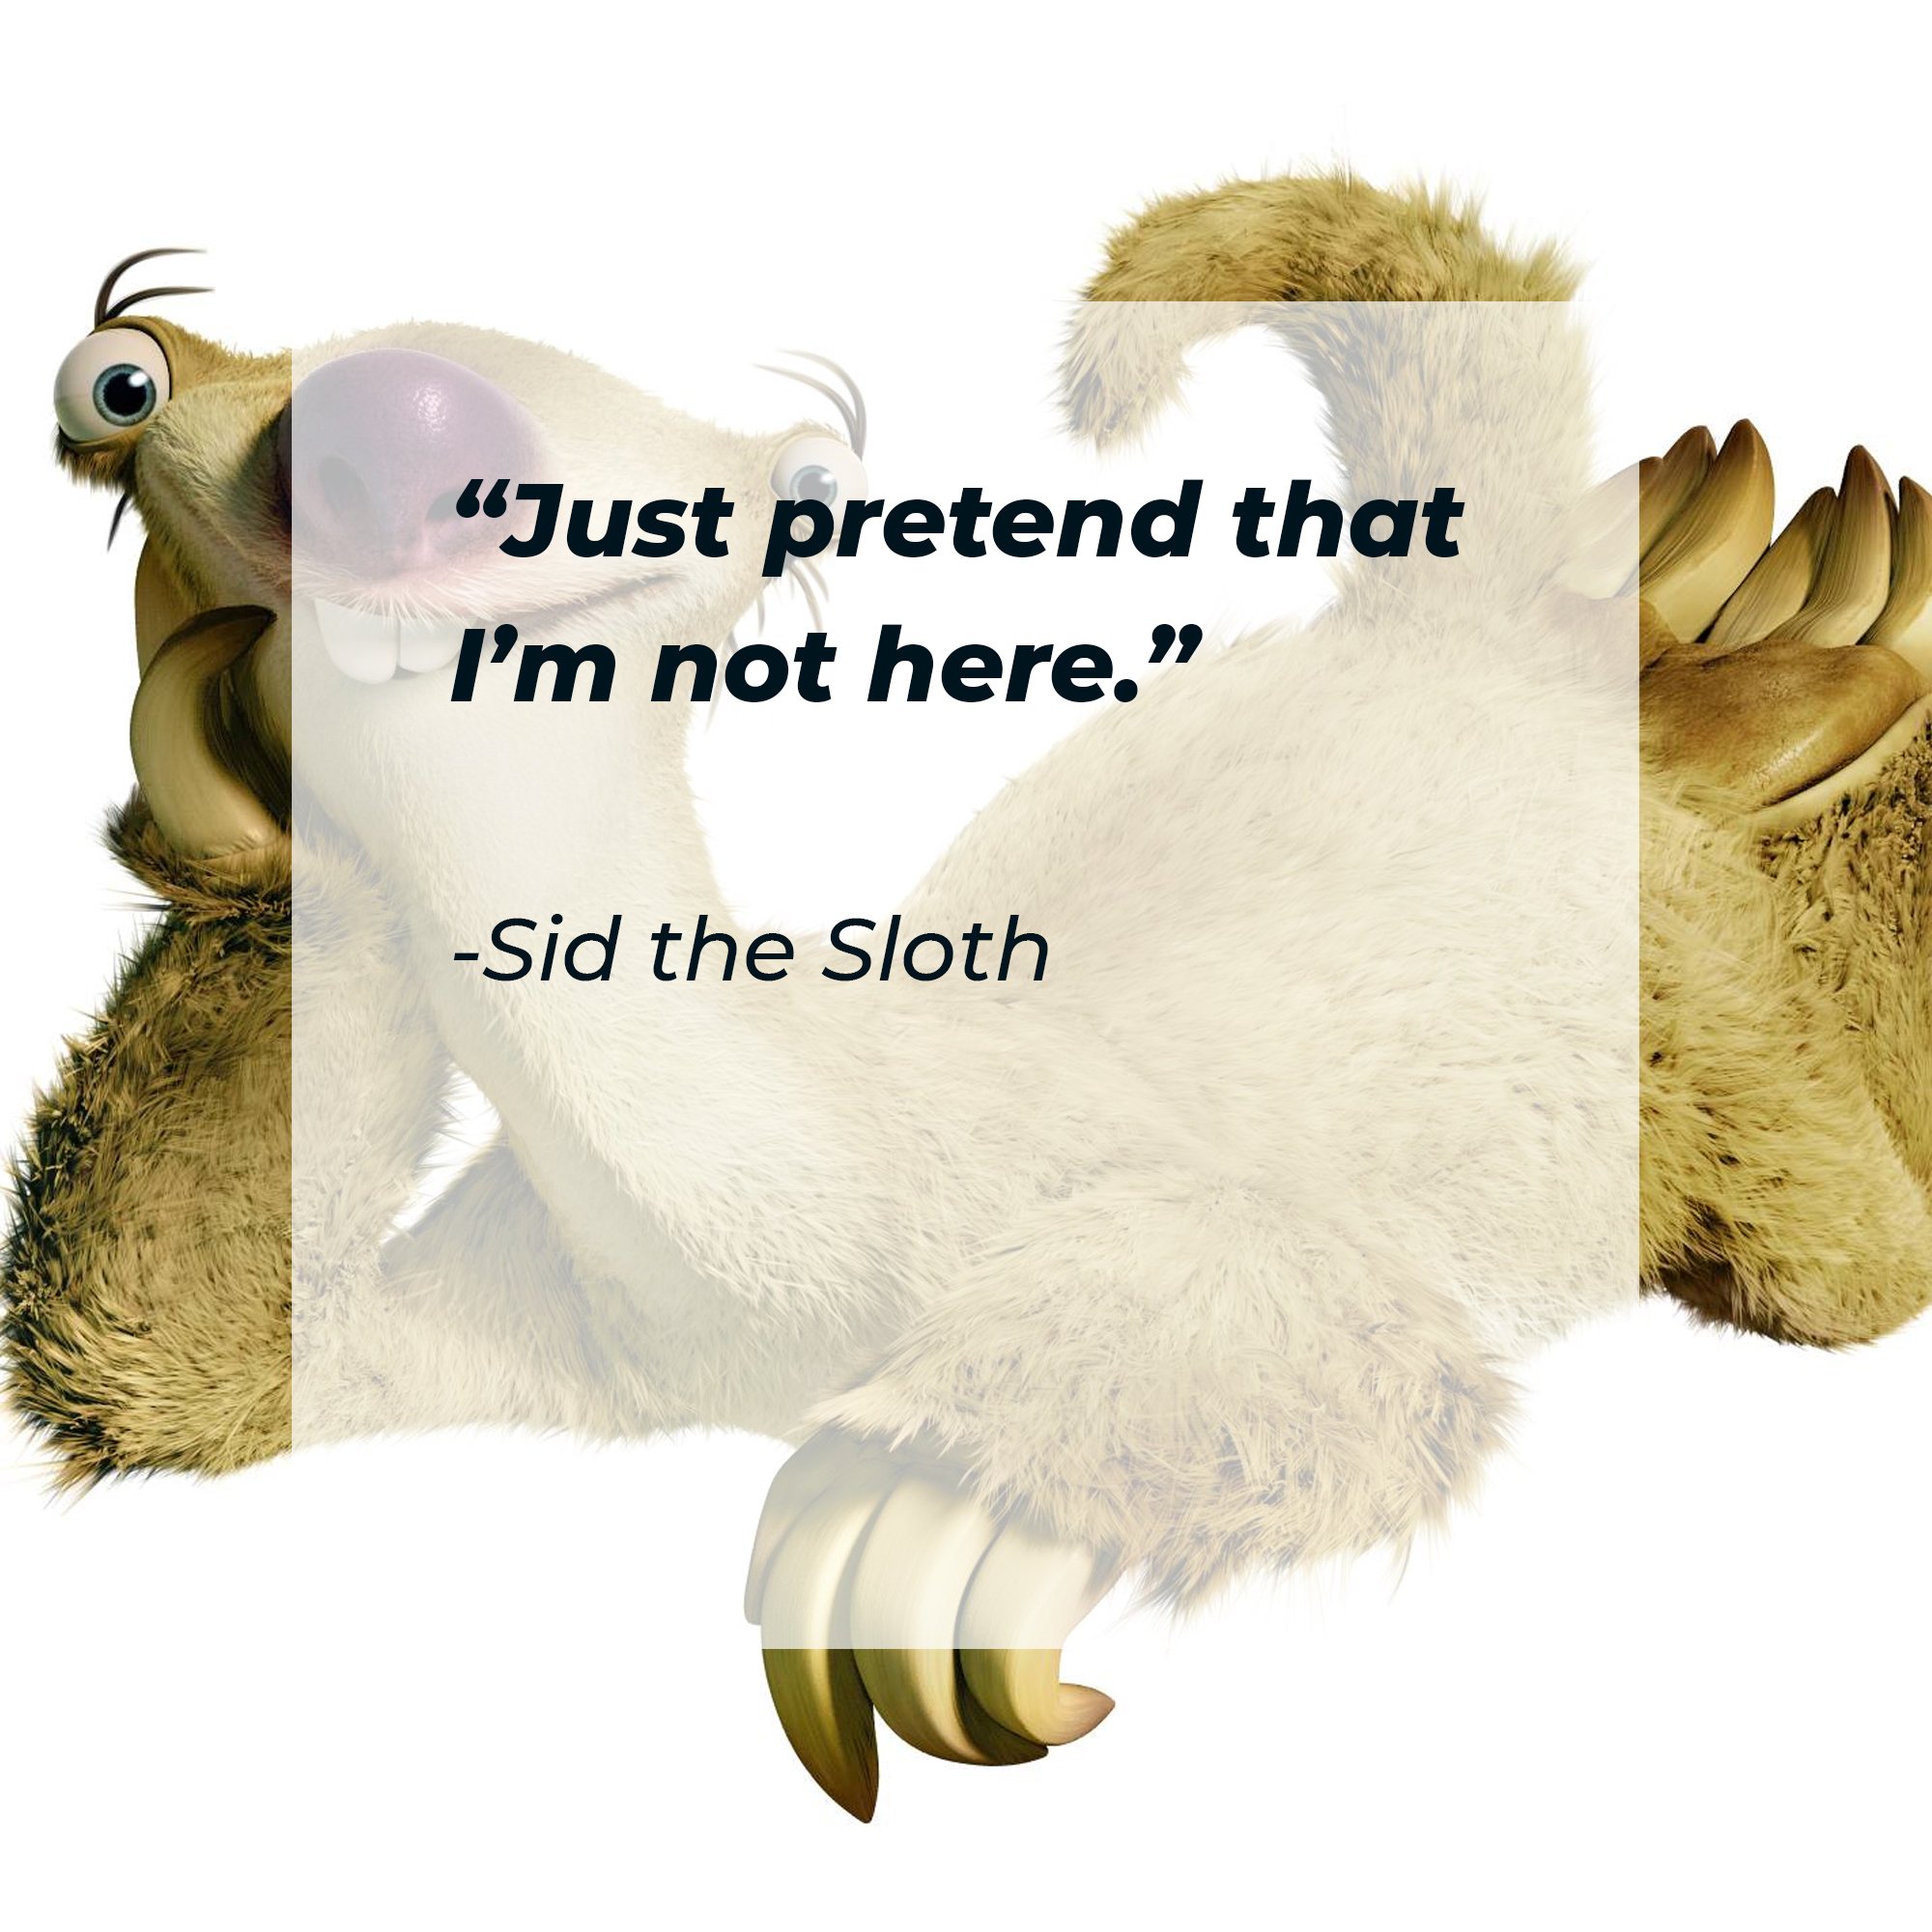 Sid the Sloth's quote: “Just pretend that I’m not here.” | Image: AmoDays